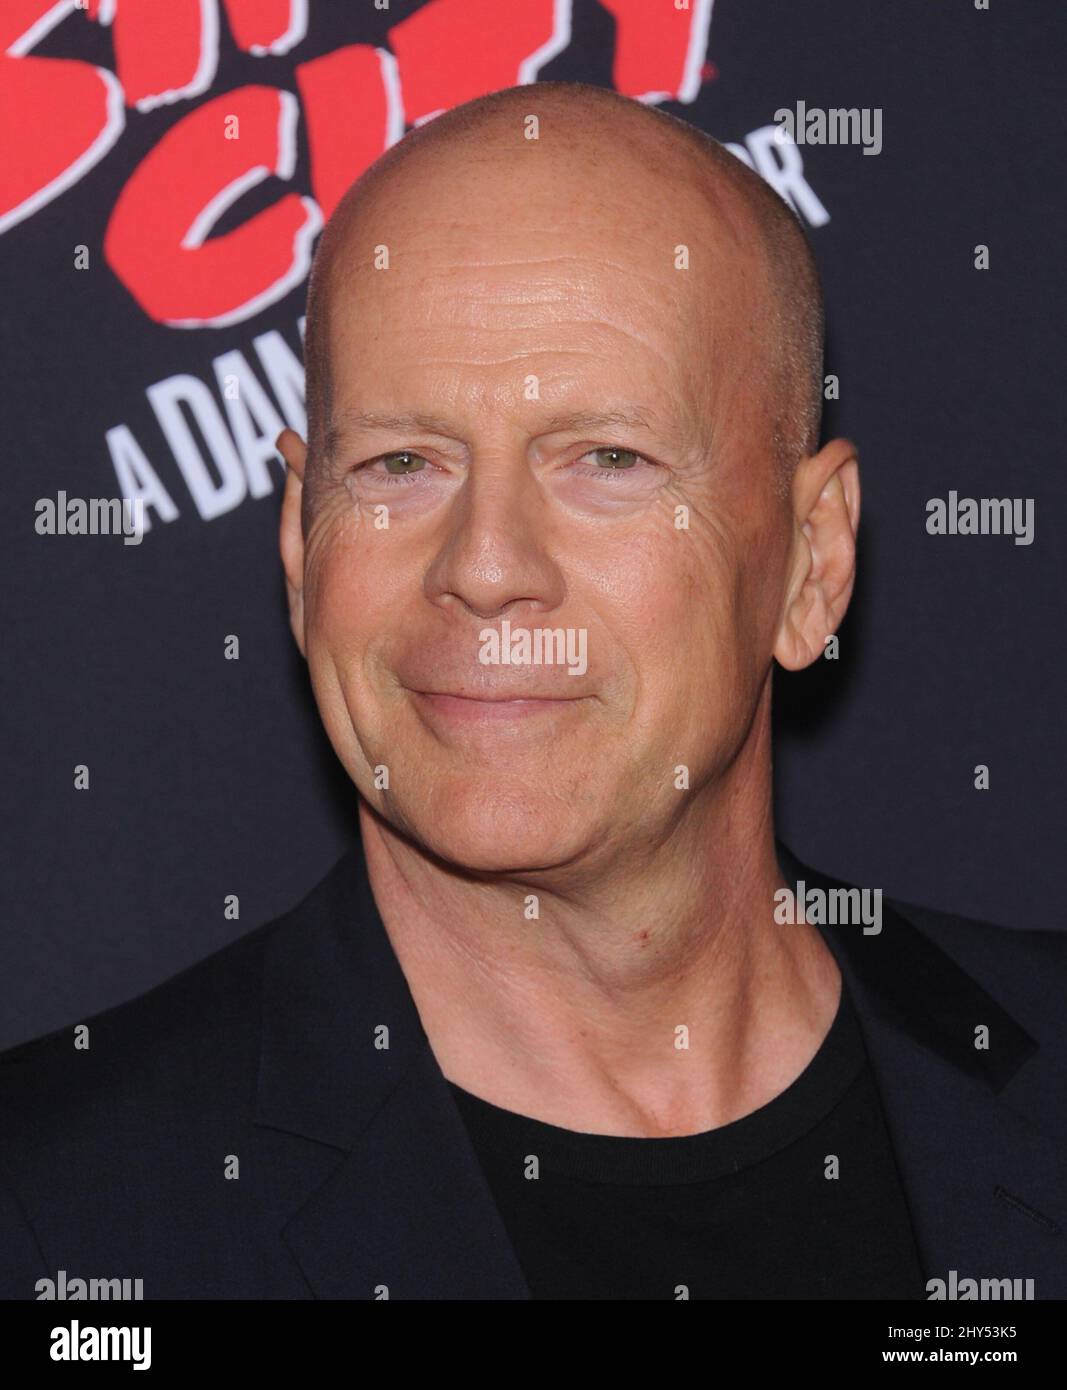 Bruce Willis attending the premiere of 'Sin City: A Dame To Kill For' in Los Angeles Stock Photo